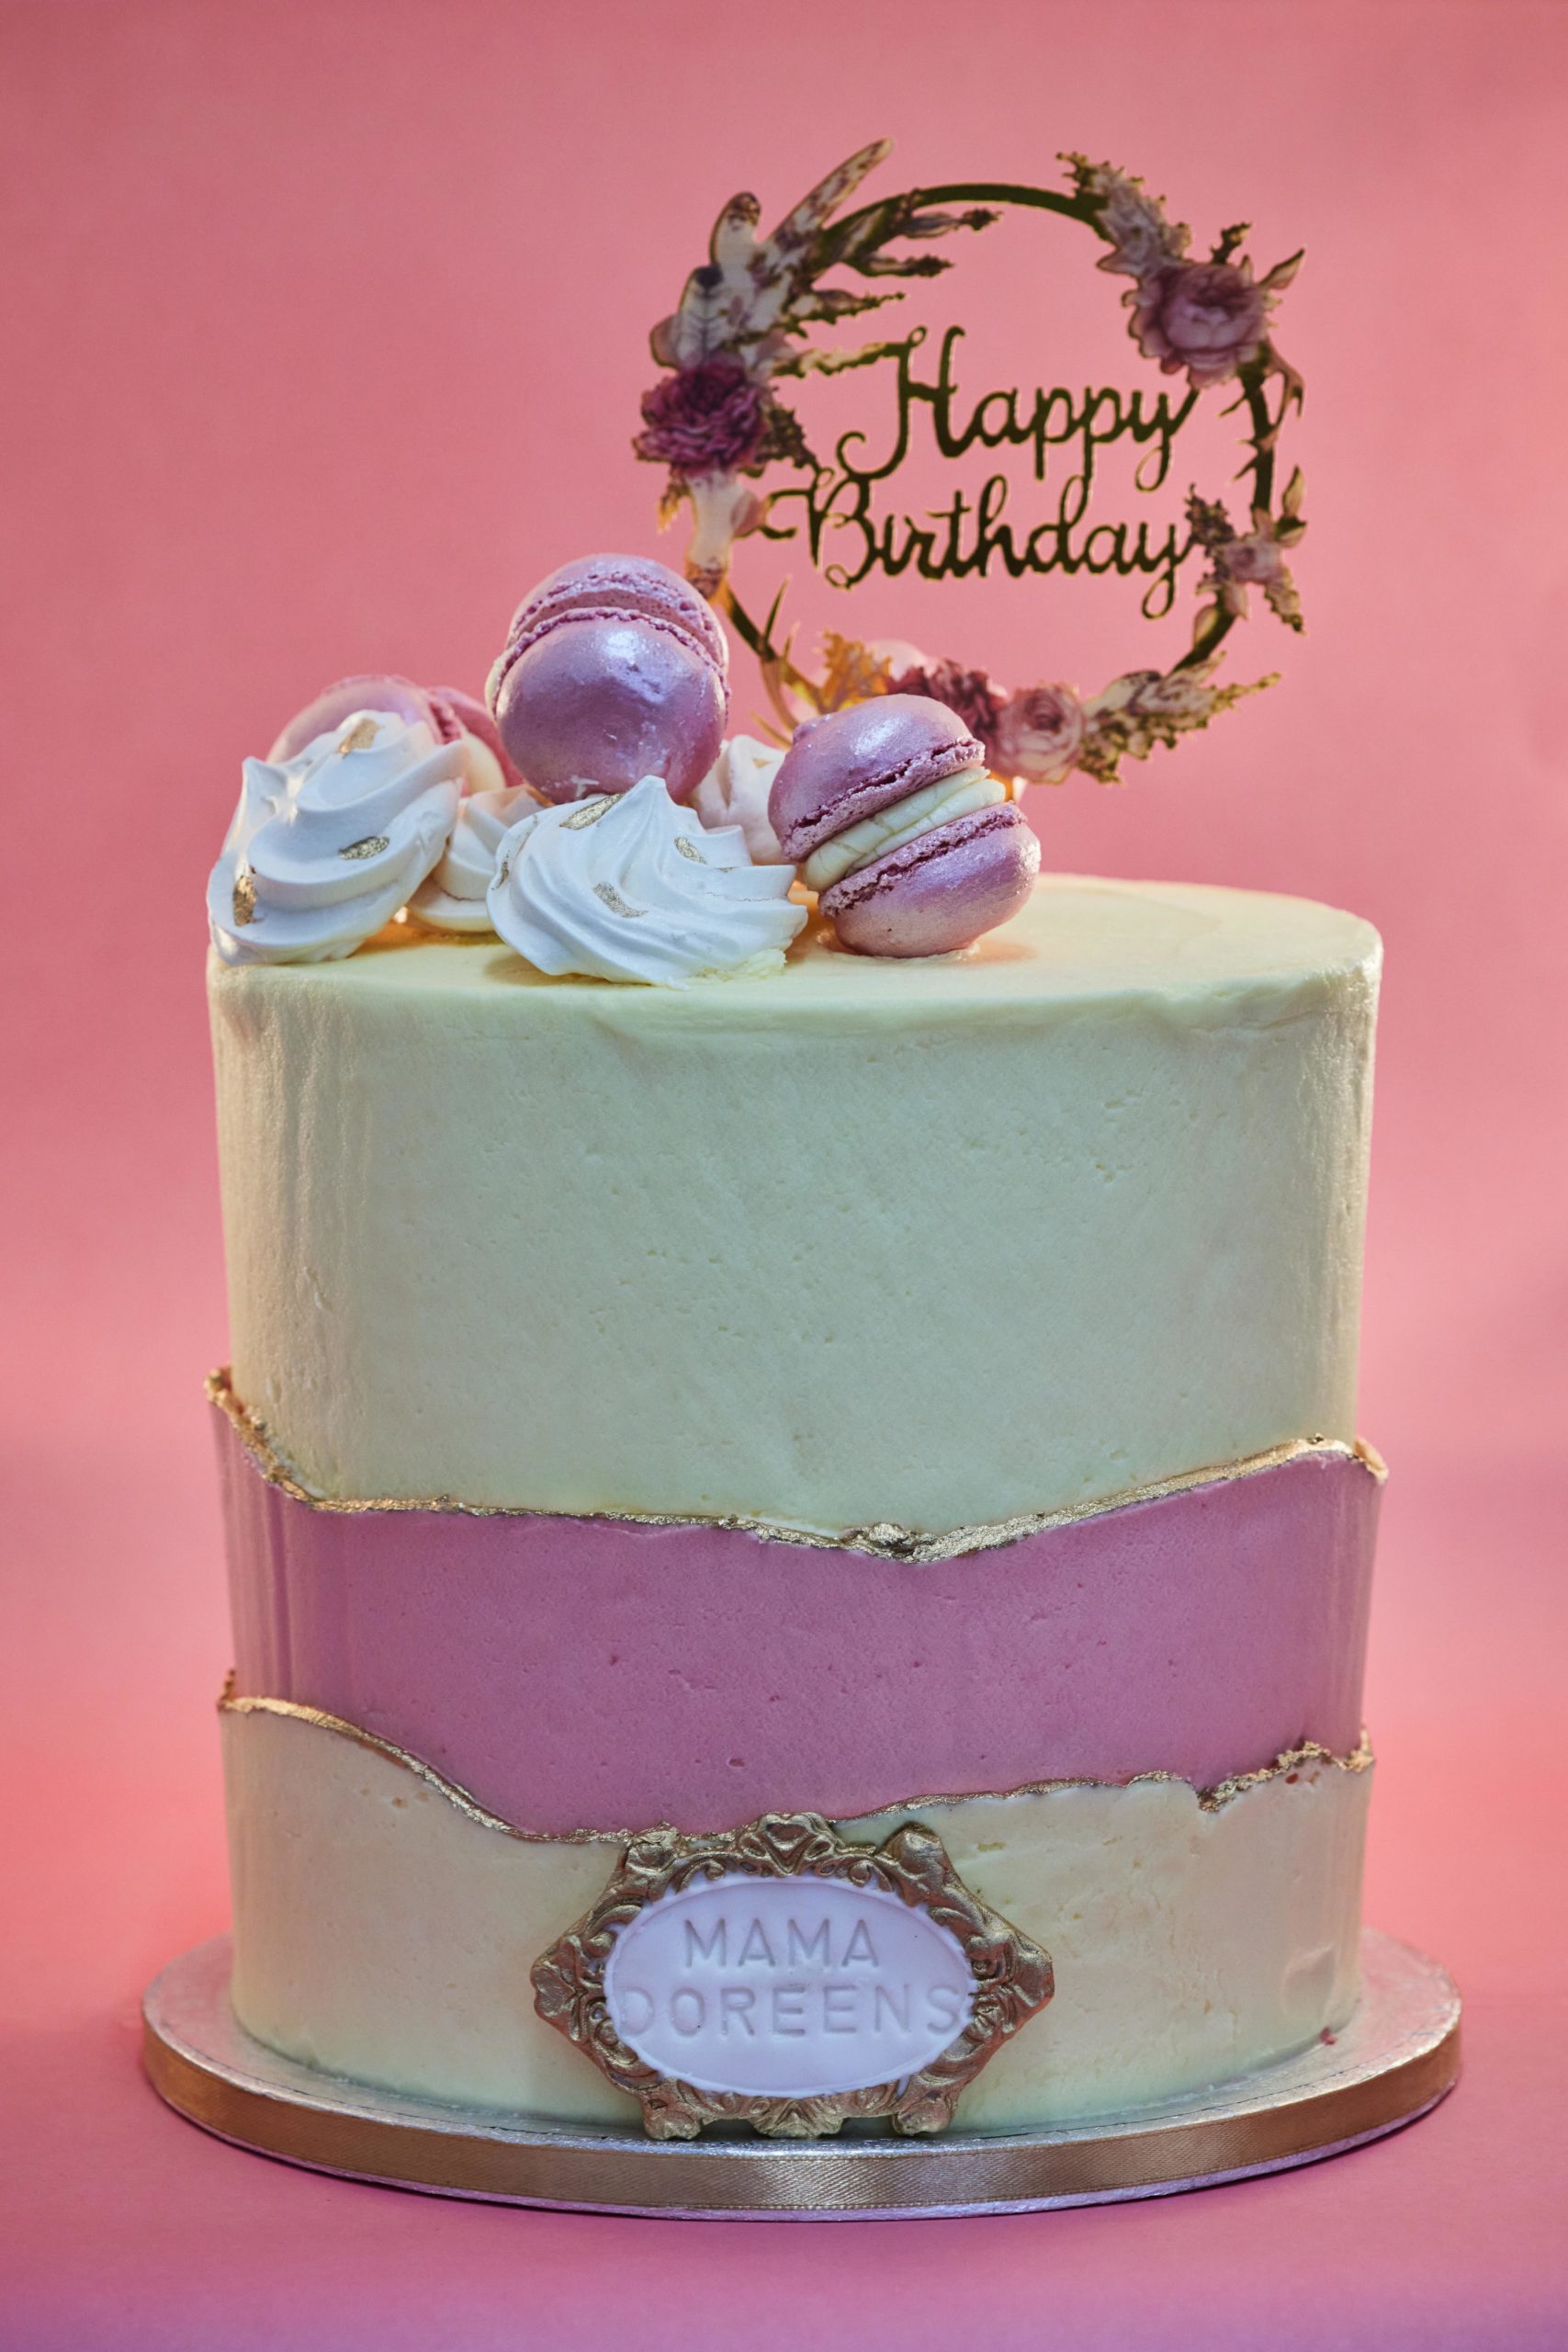 3 layer cake 18th birthday - Rocel's Cakes & Pastries | Facebook